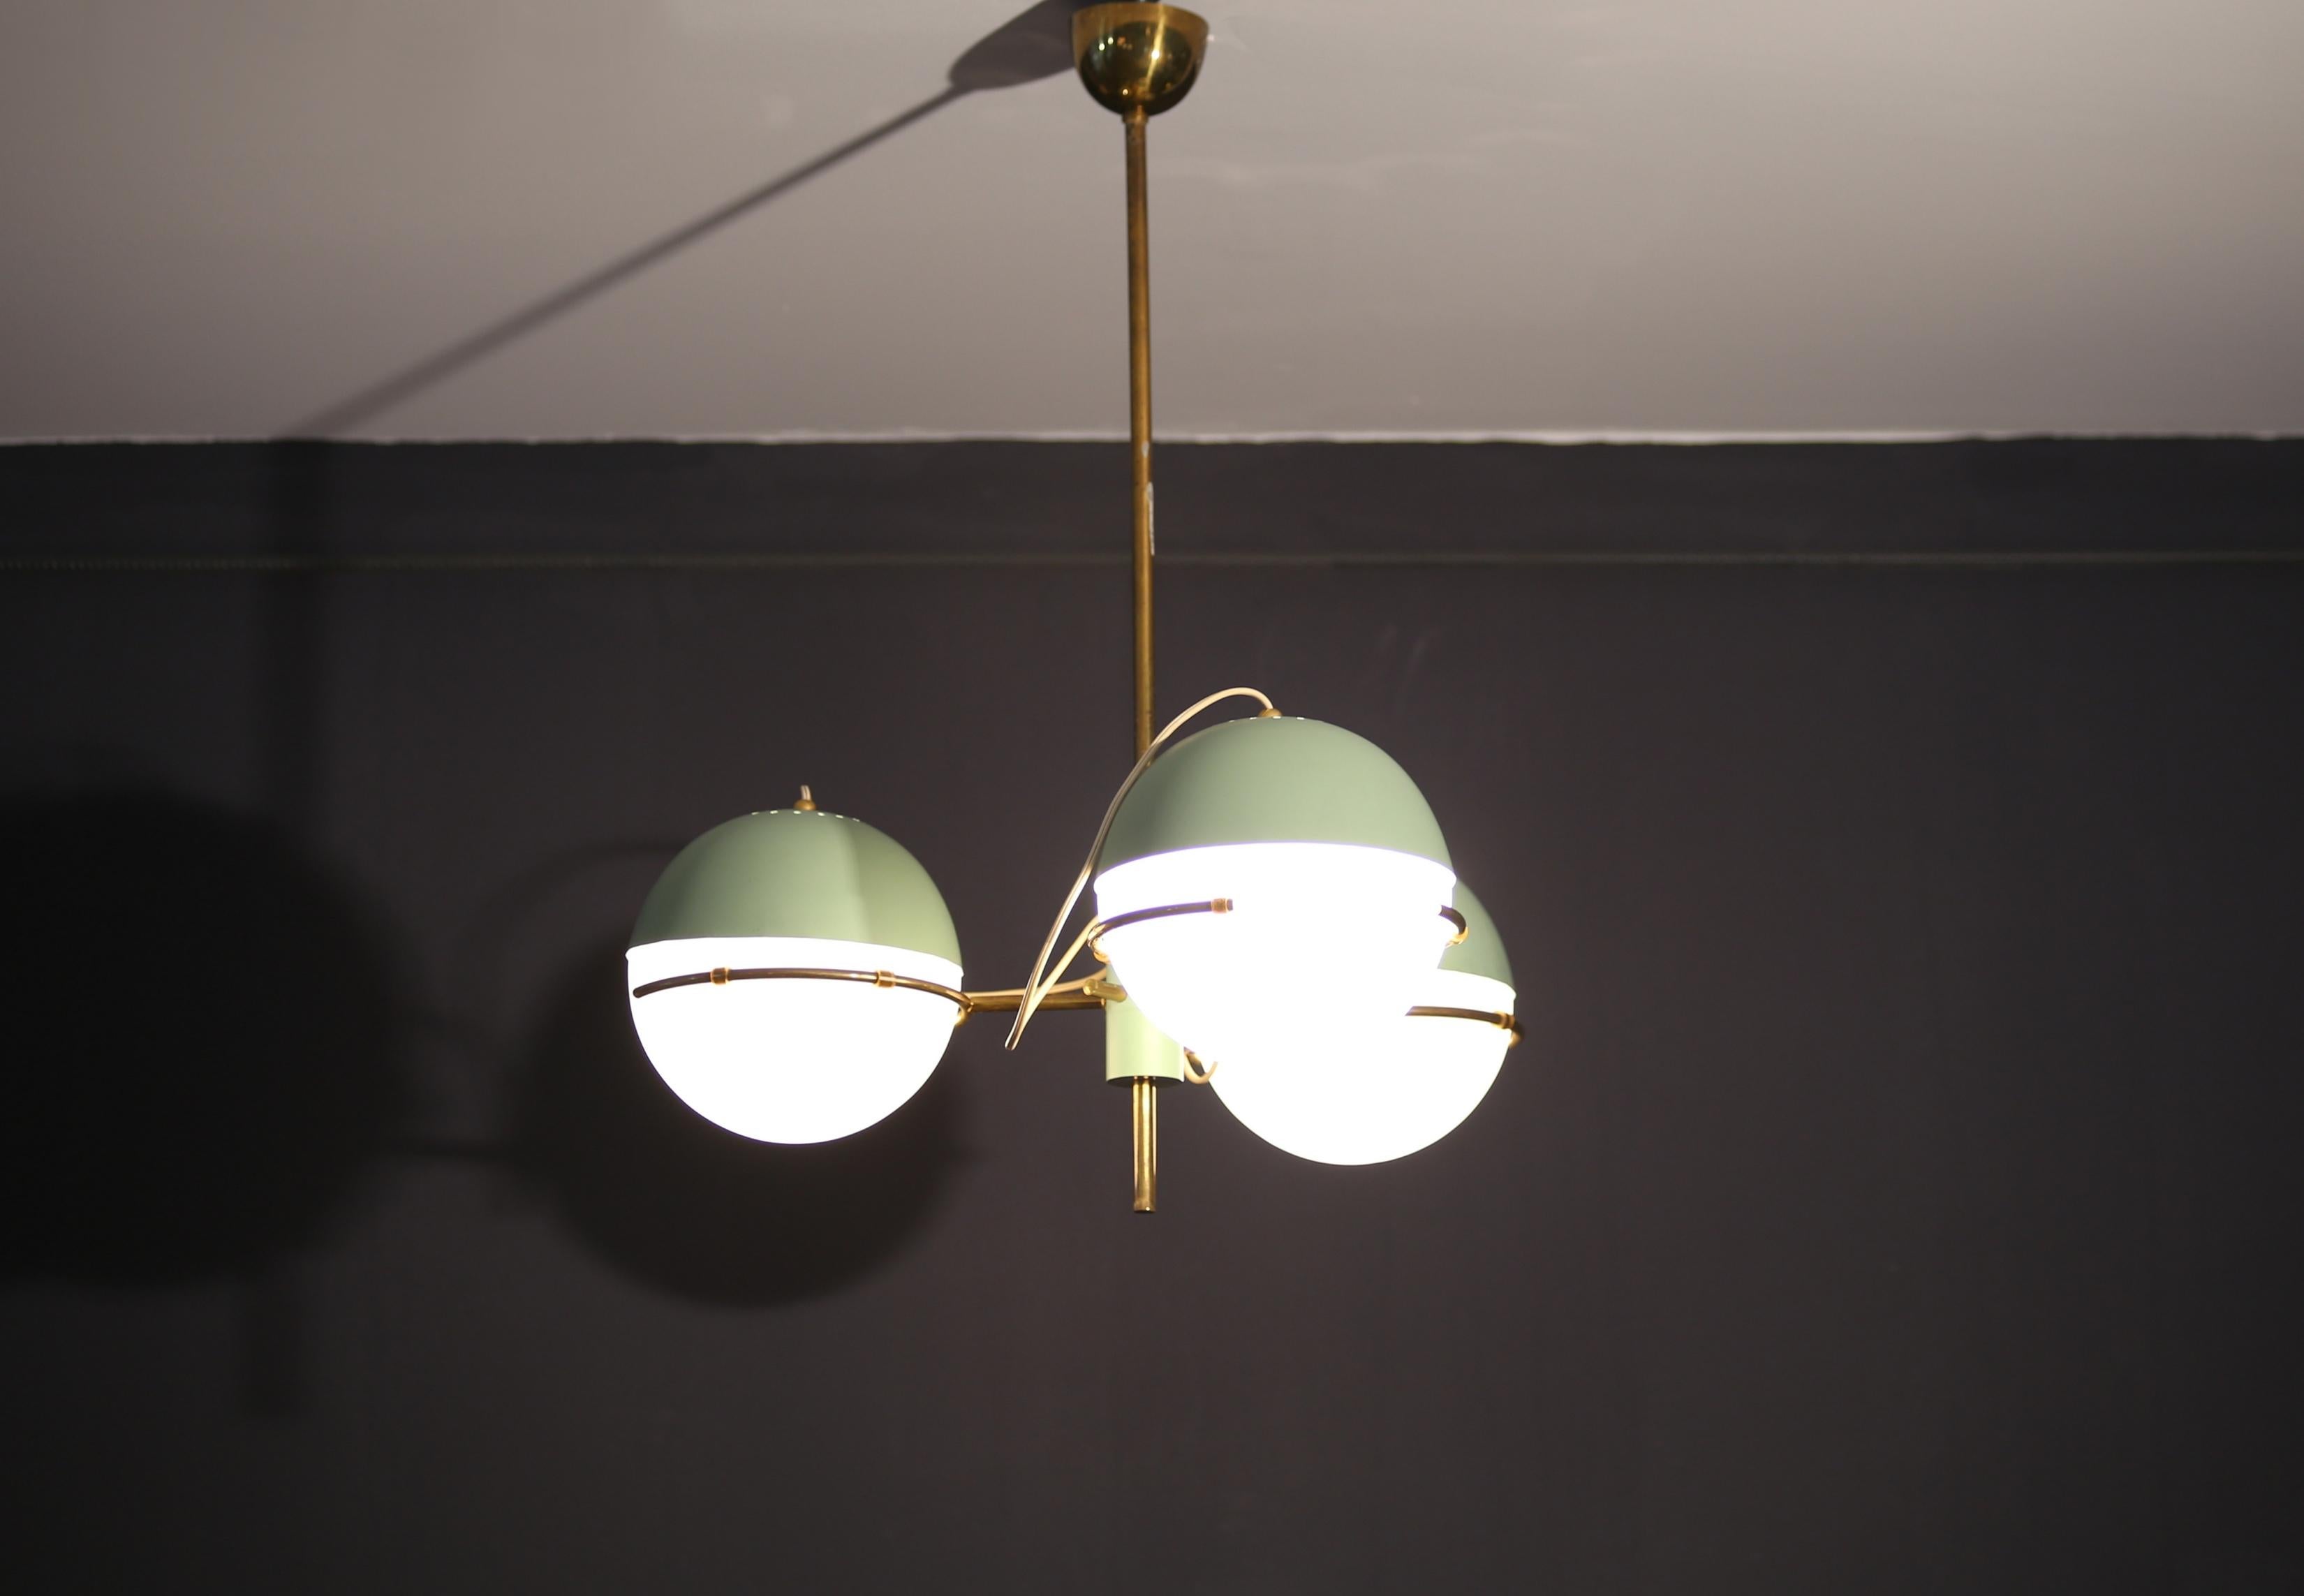 Stilnovo
Three-light pendant lamp, with brass structure and opal glass diffusers.
Stilnovo production from the 1950s.